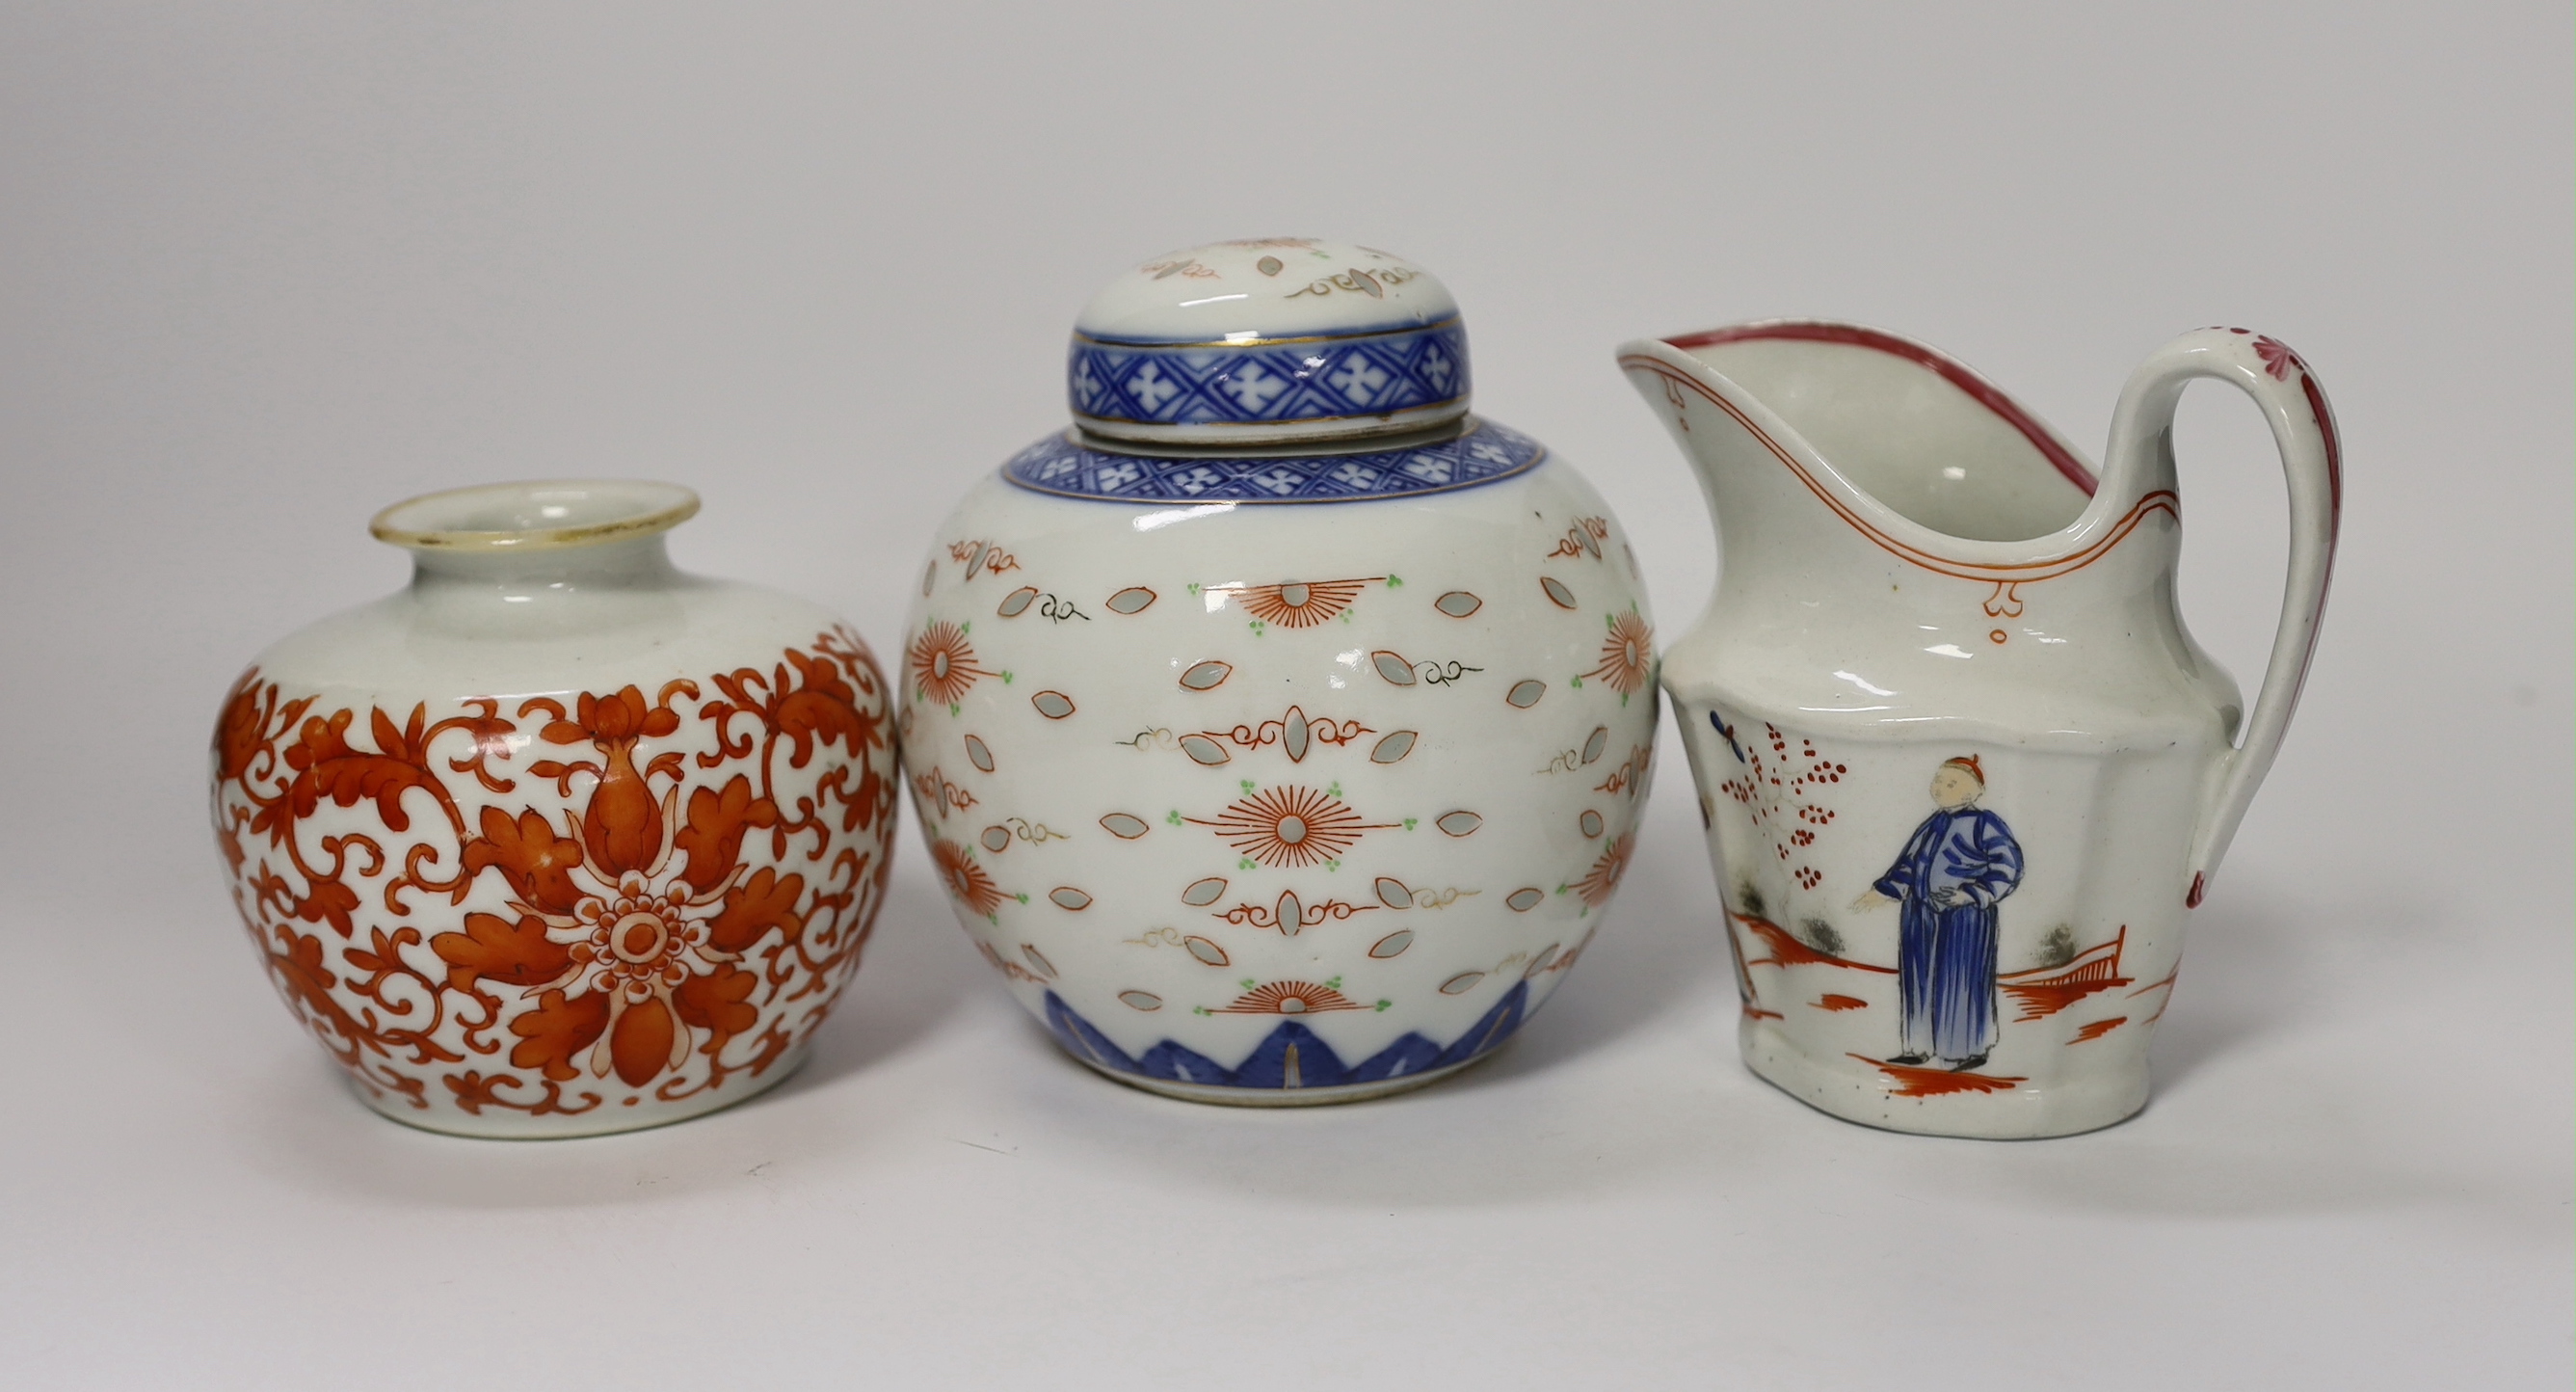 A late 18th century Newhall type jug, an early 20th century Chinese underglaze copper jar, a jar and cover and a glass snuff bottle